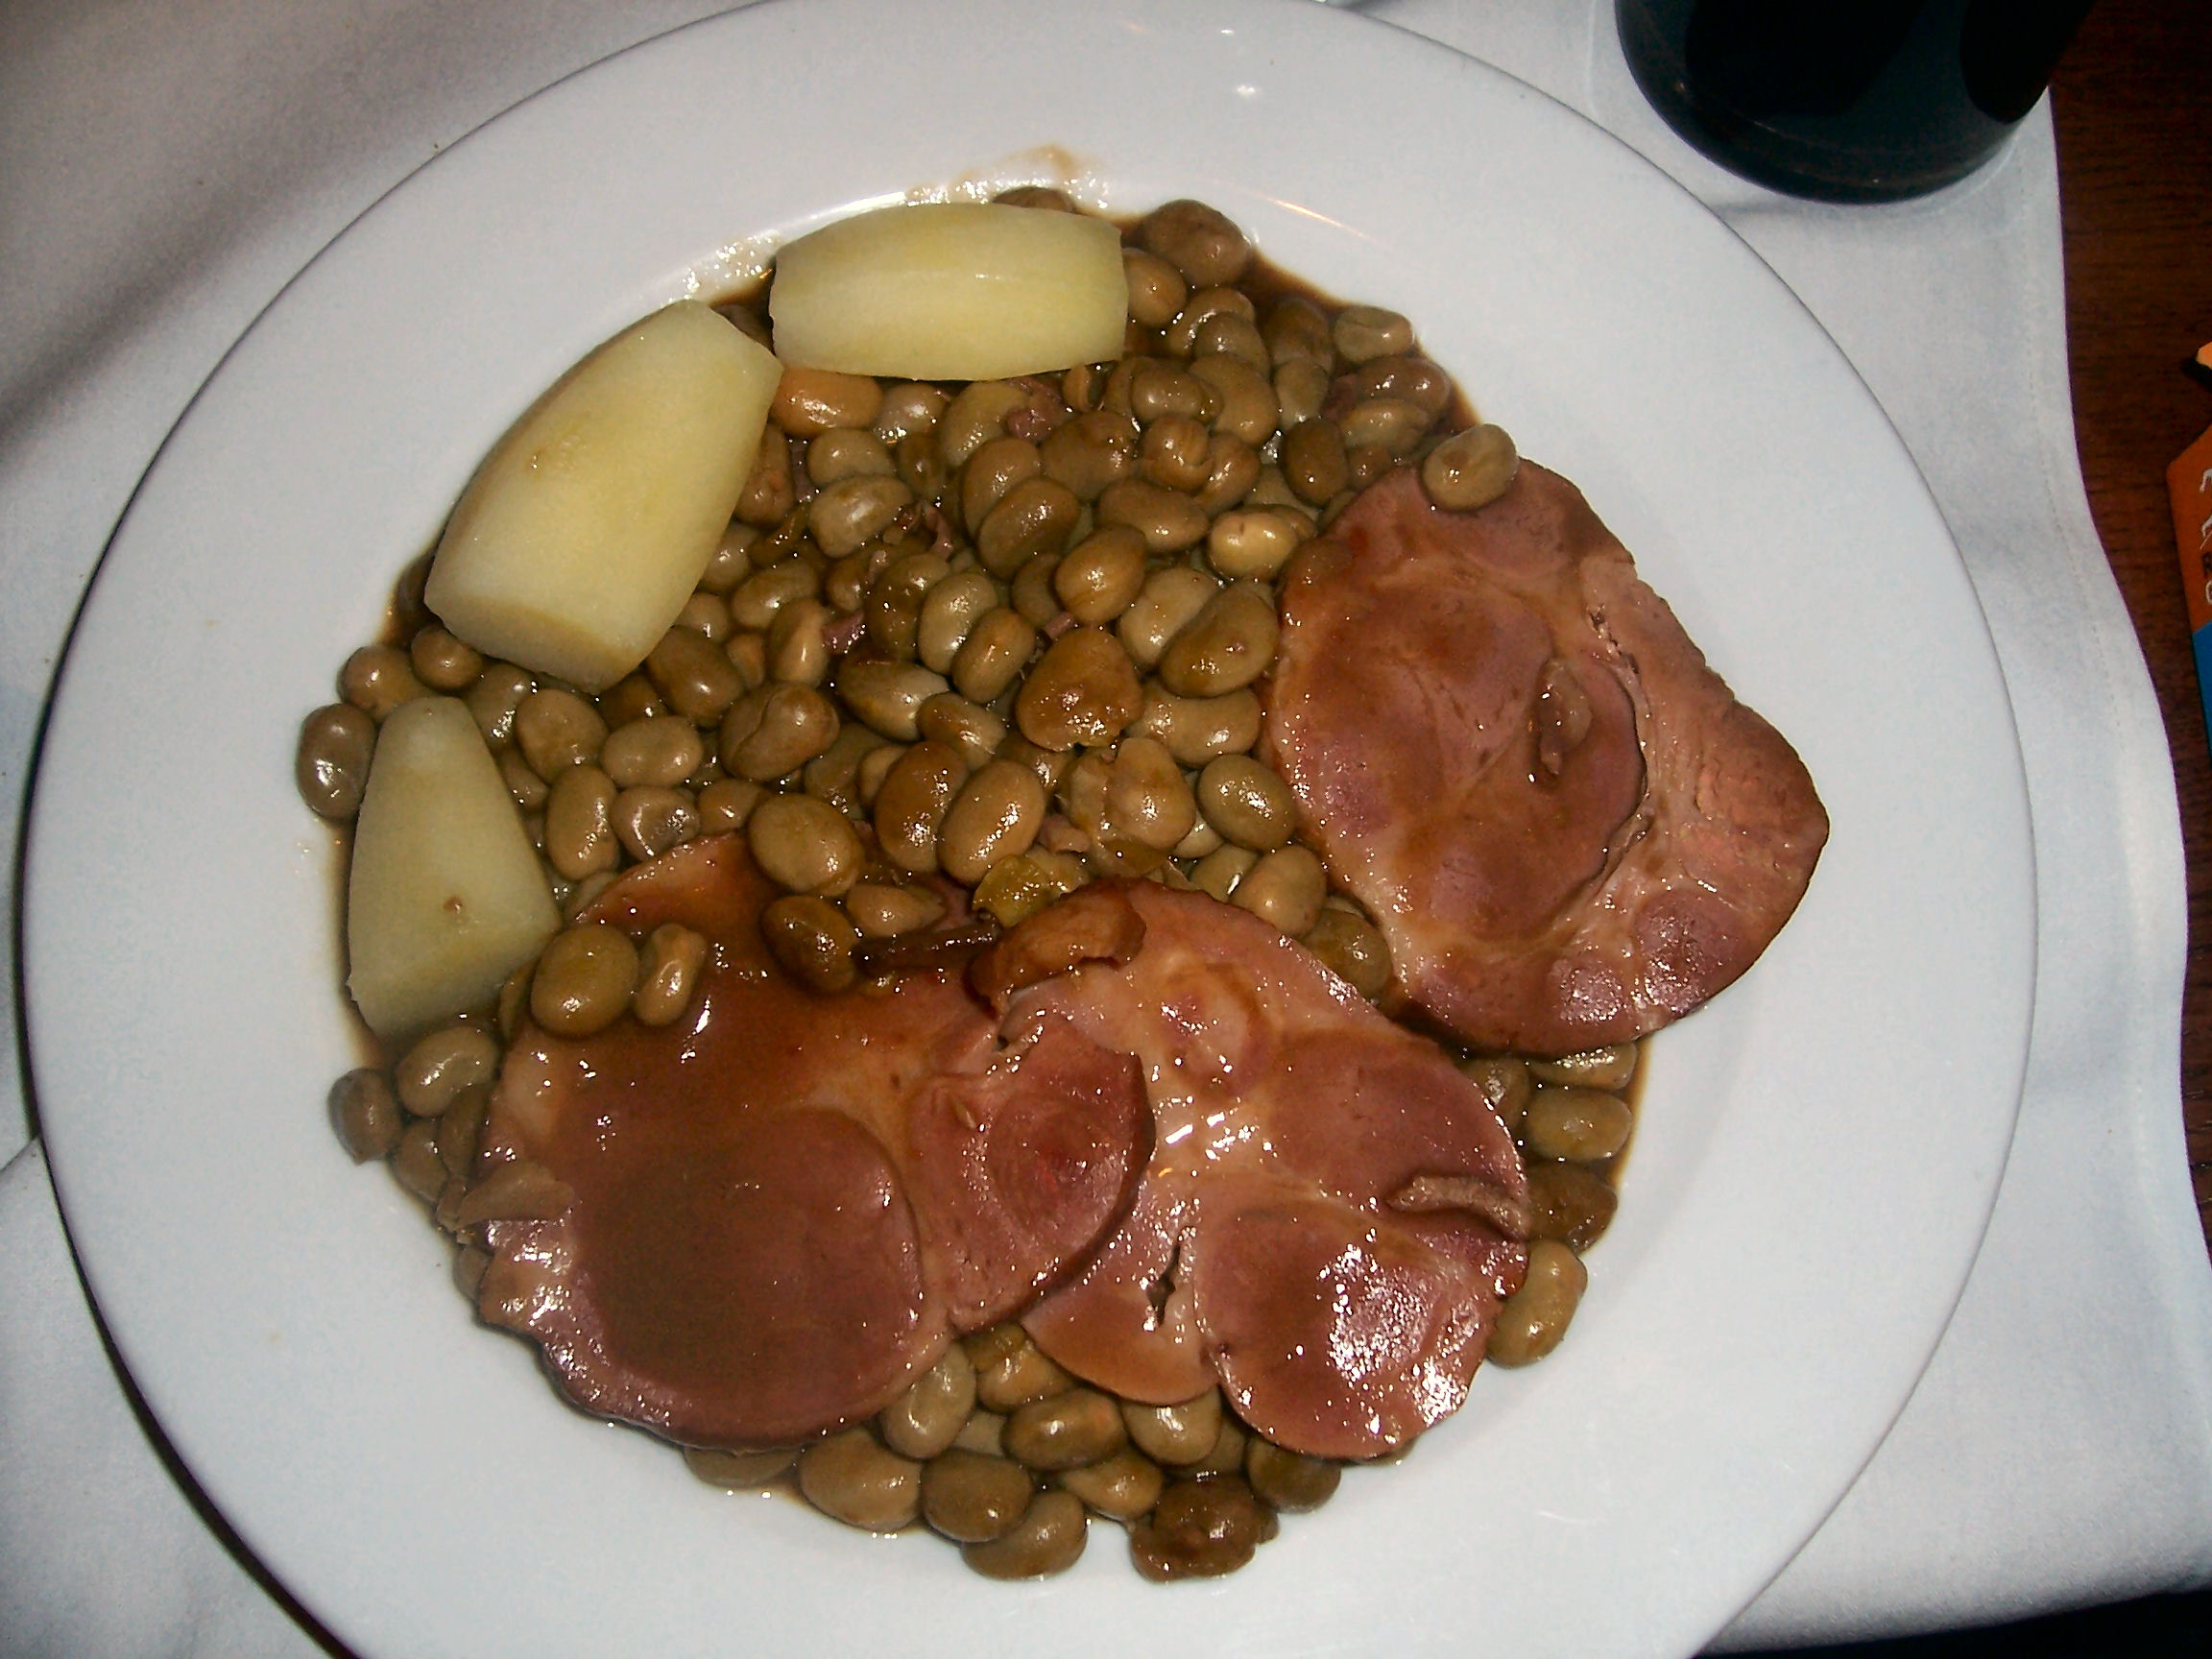 Luxembourg national dish